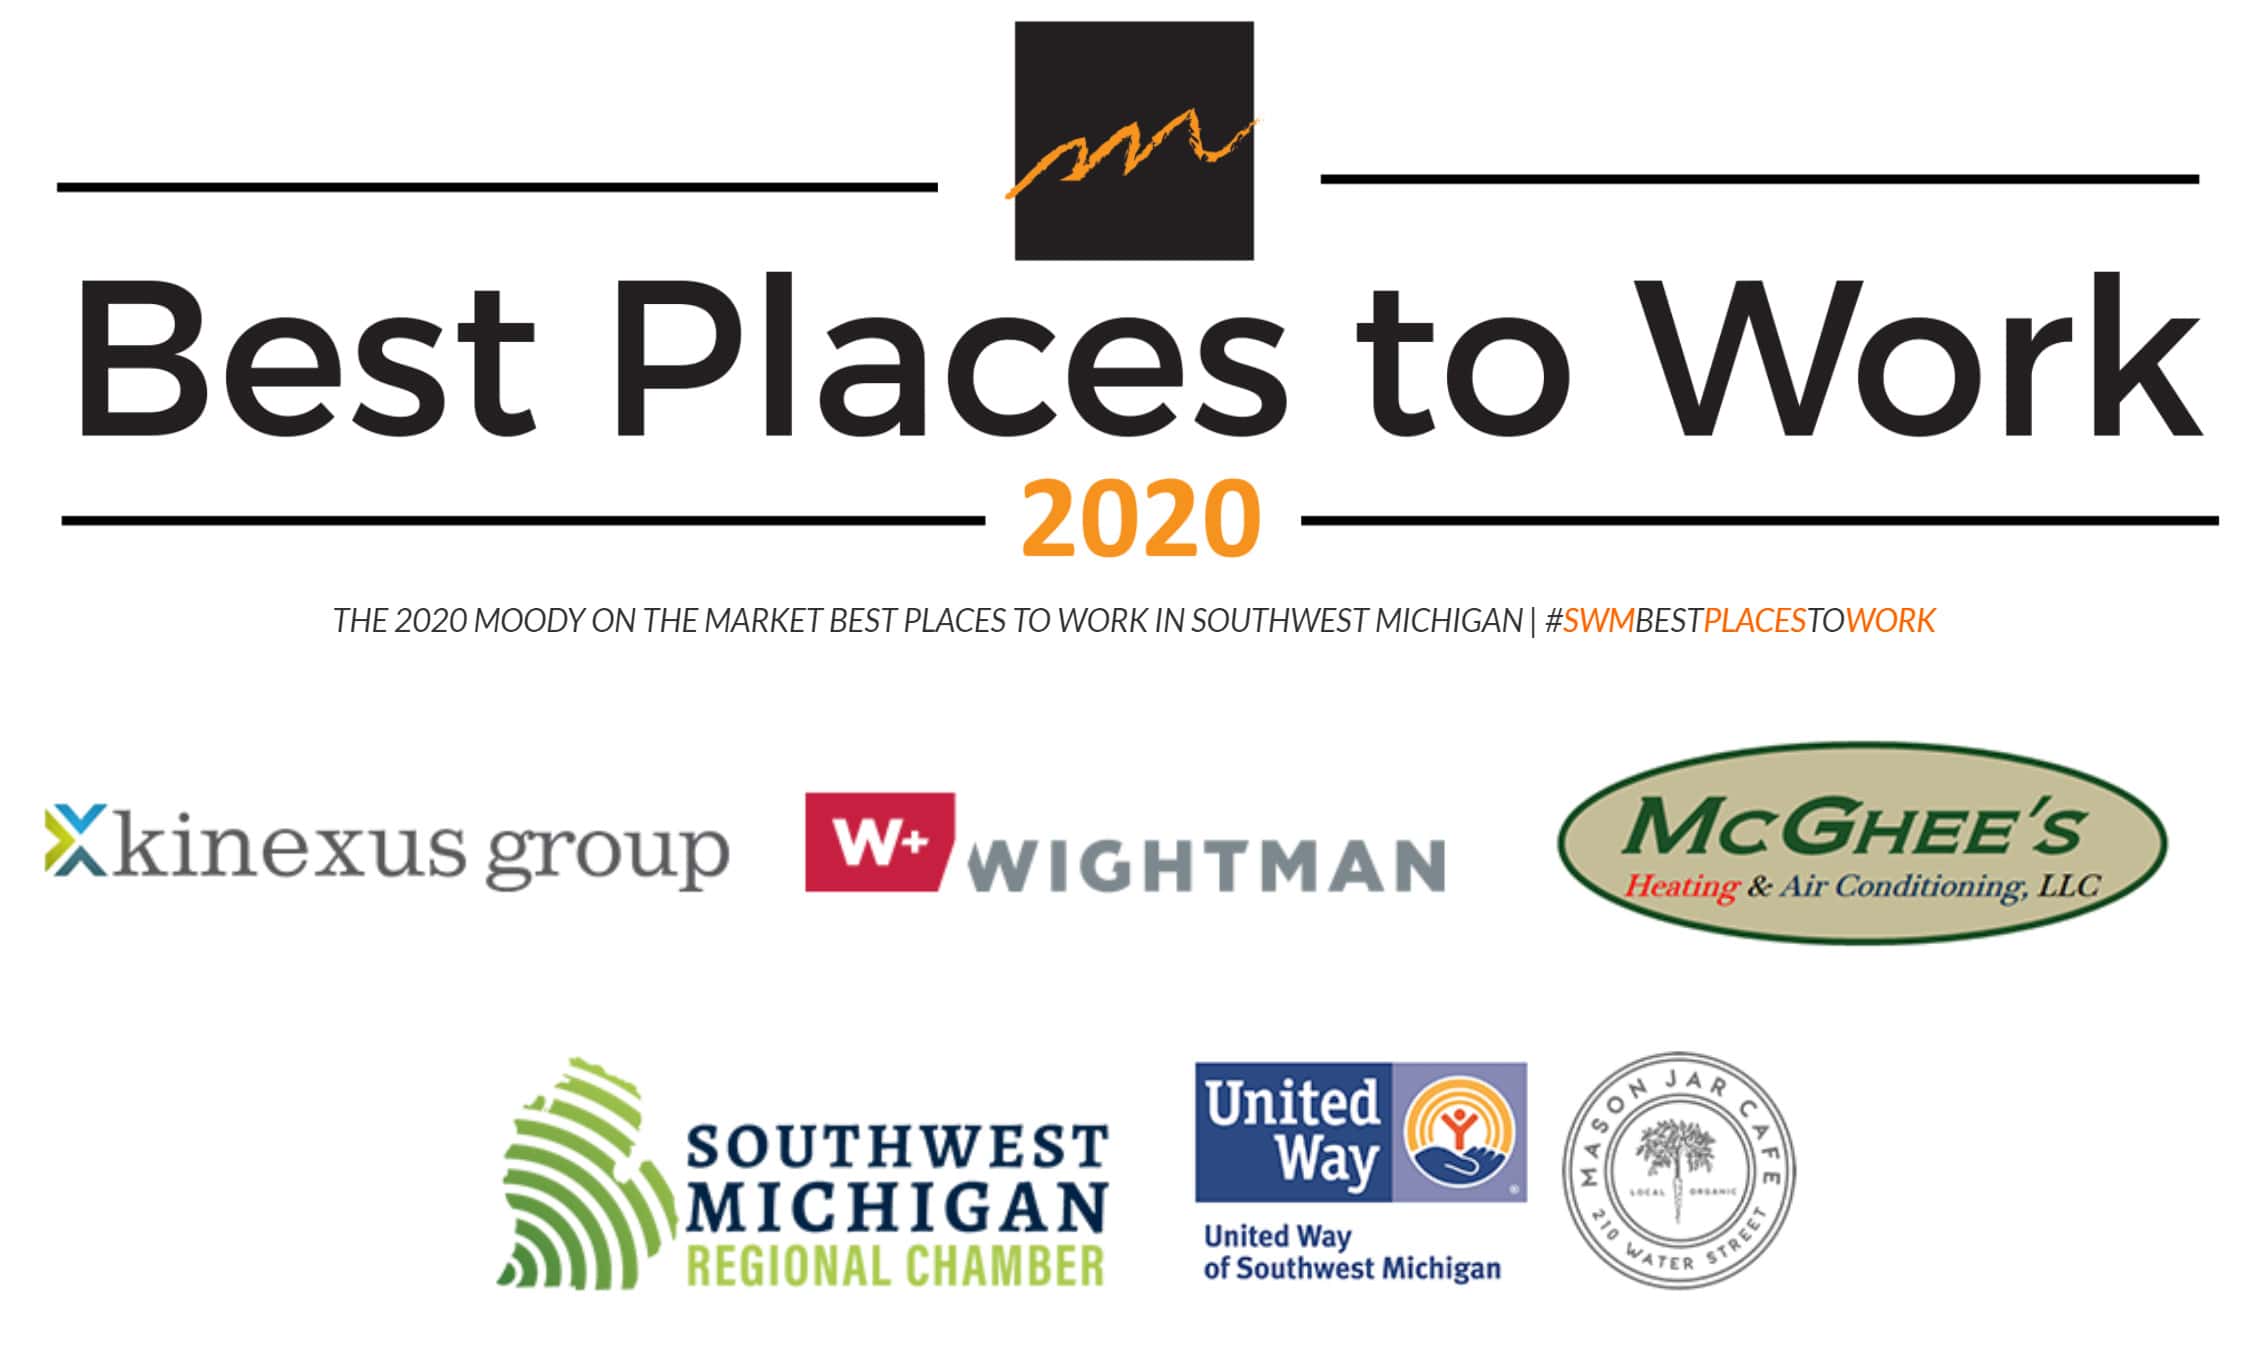 20 Best Places to Work in SW Michigan Will be Revealed Monday Morning